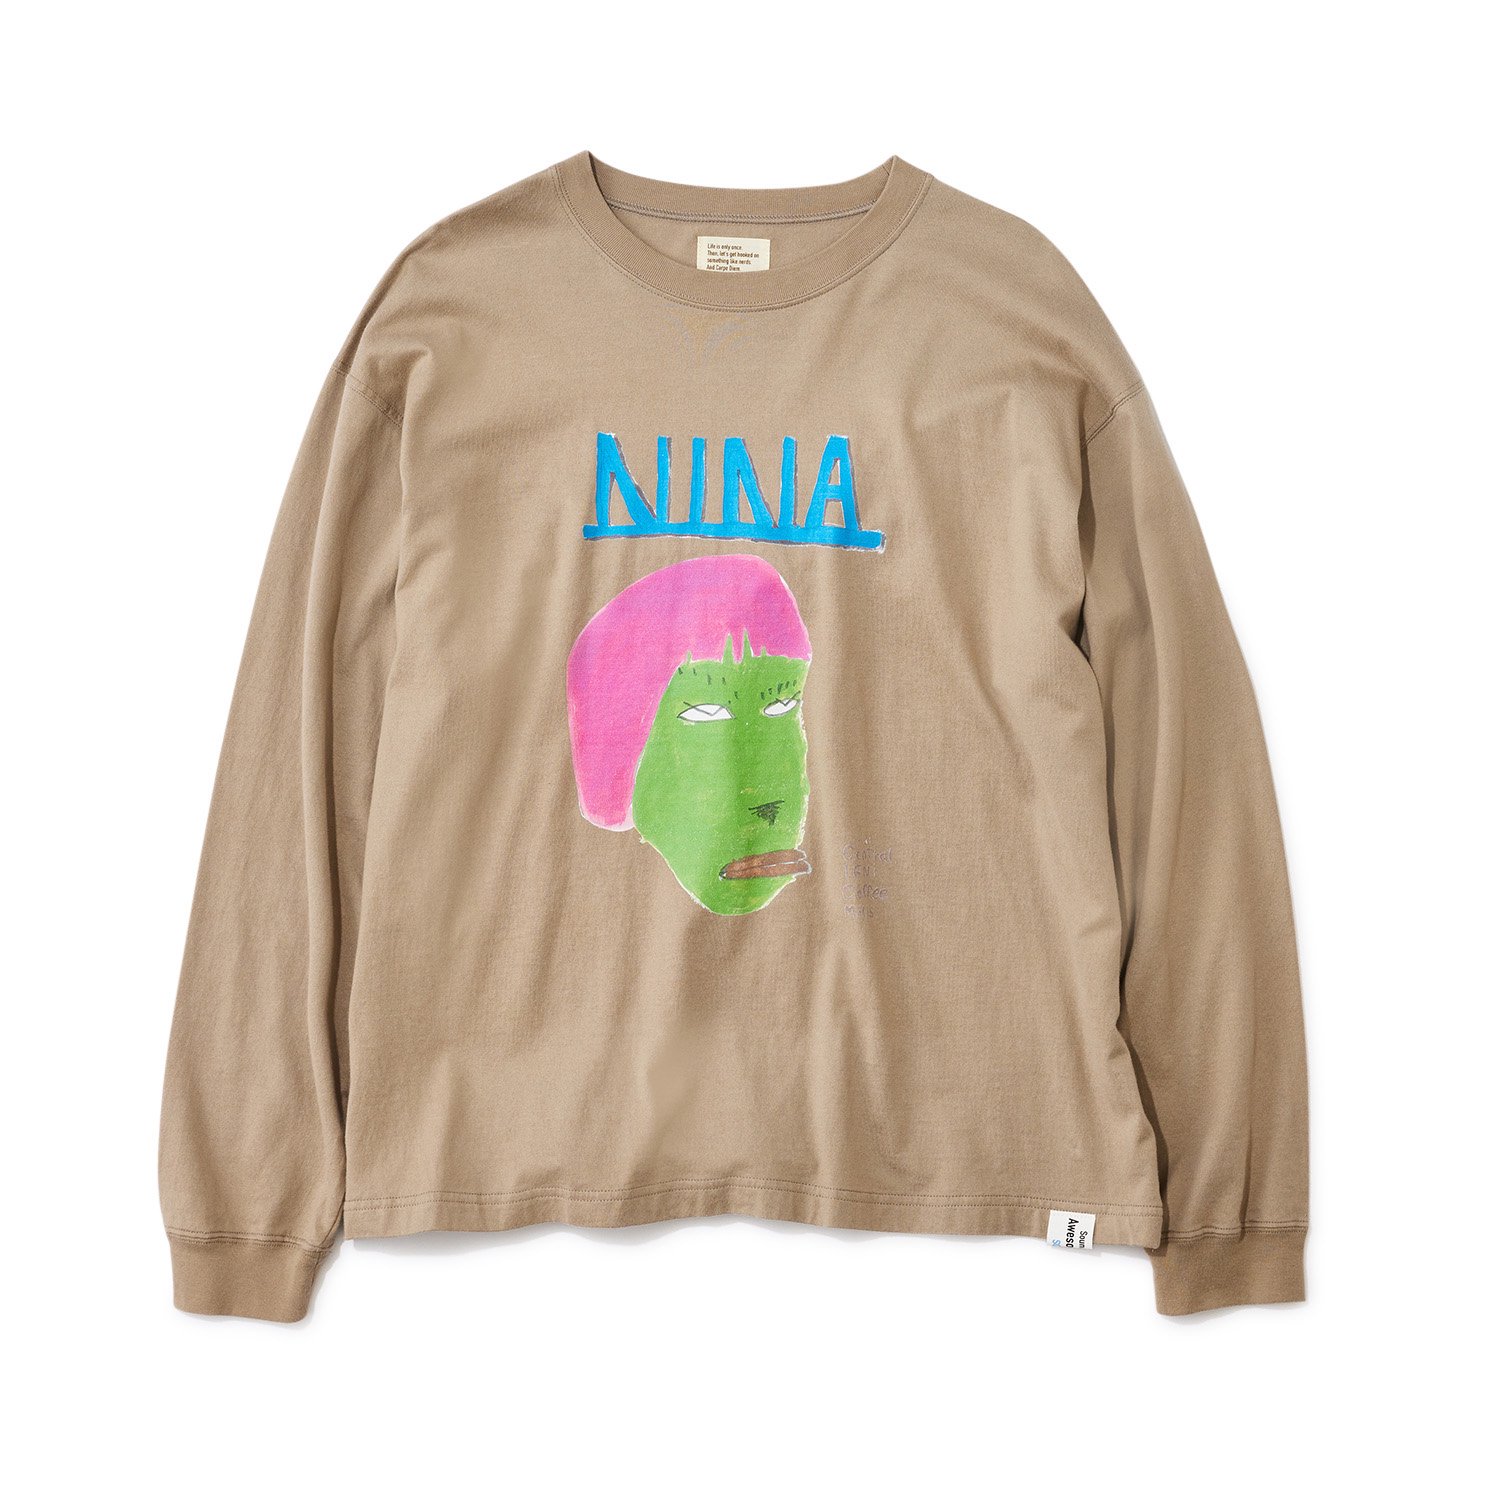 <img class='new_mark_img1' src='https://img.shop-pro.jp/img/new/icons8.gif' style='border:none;display:inline;margin:0px;padding:0px;width:auto;' />SOUNDS AWESOME /NINA SCA Long Sleeve Tee